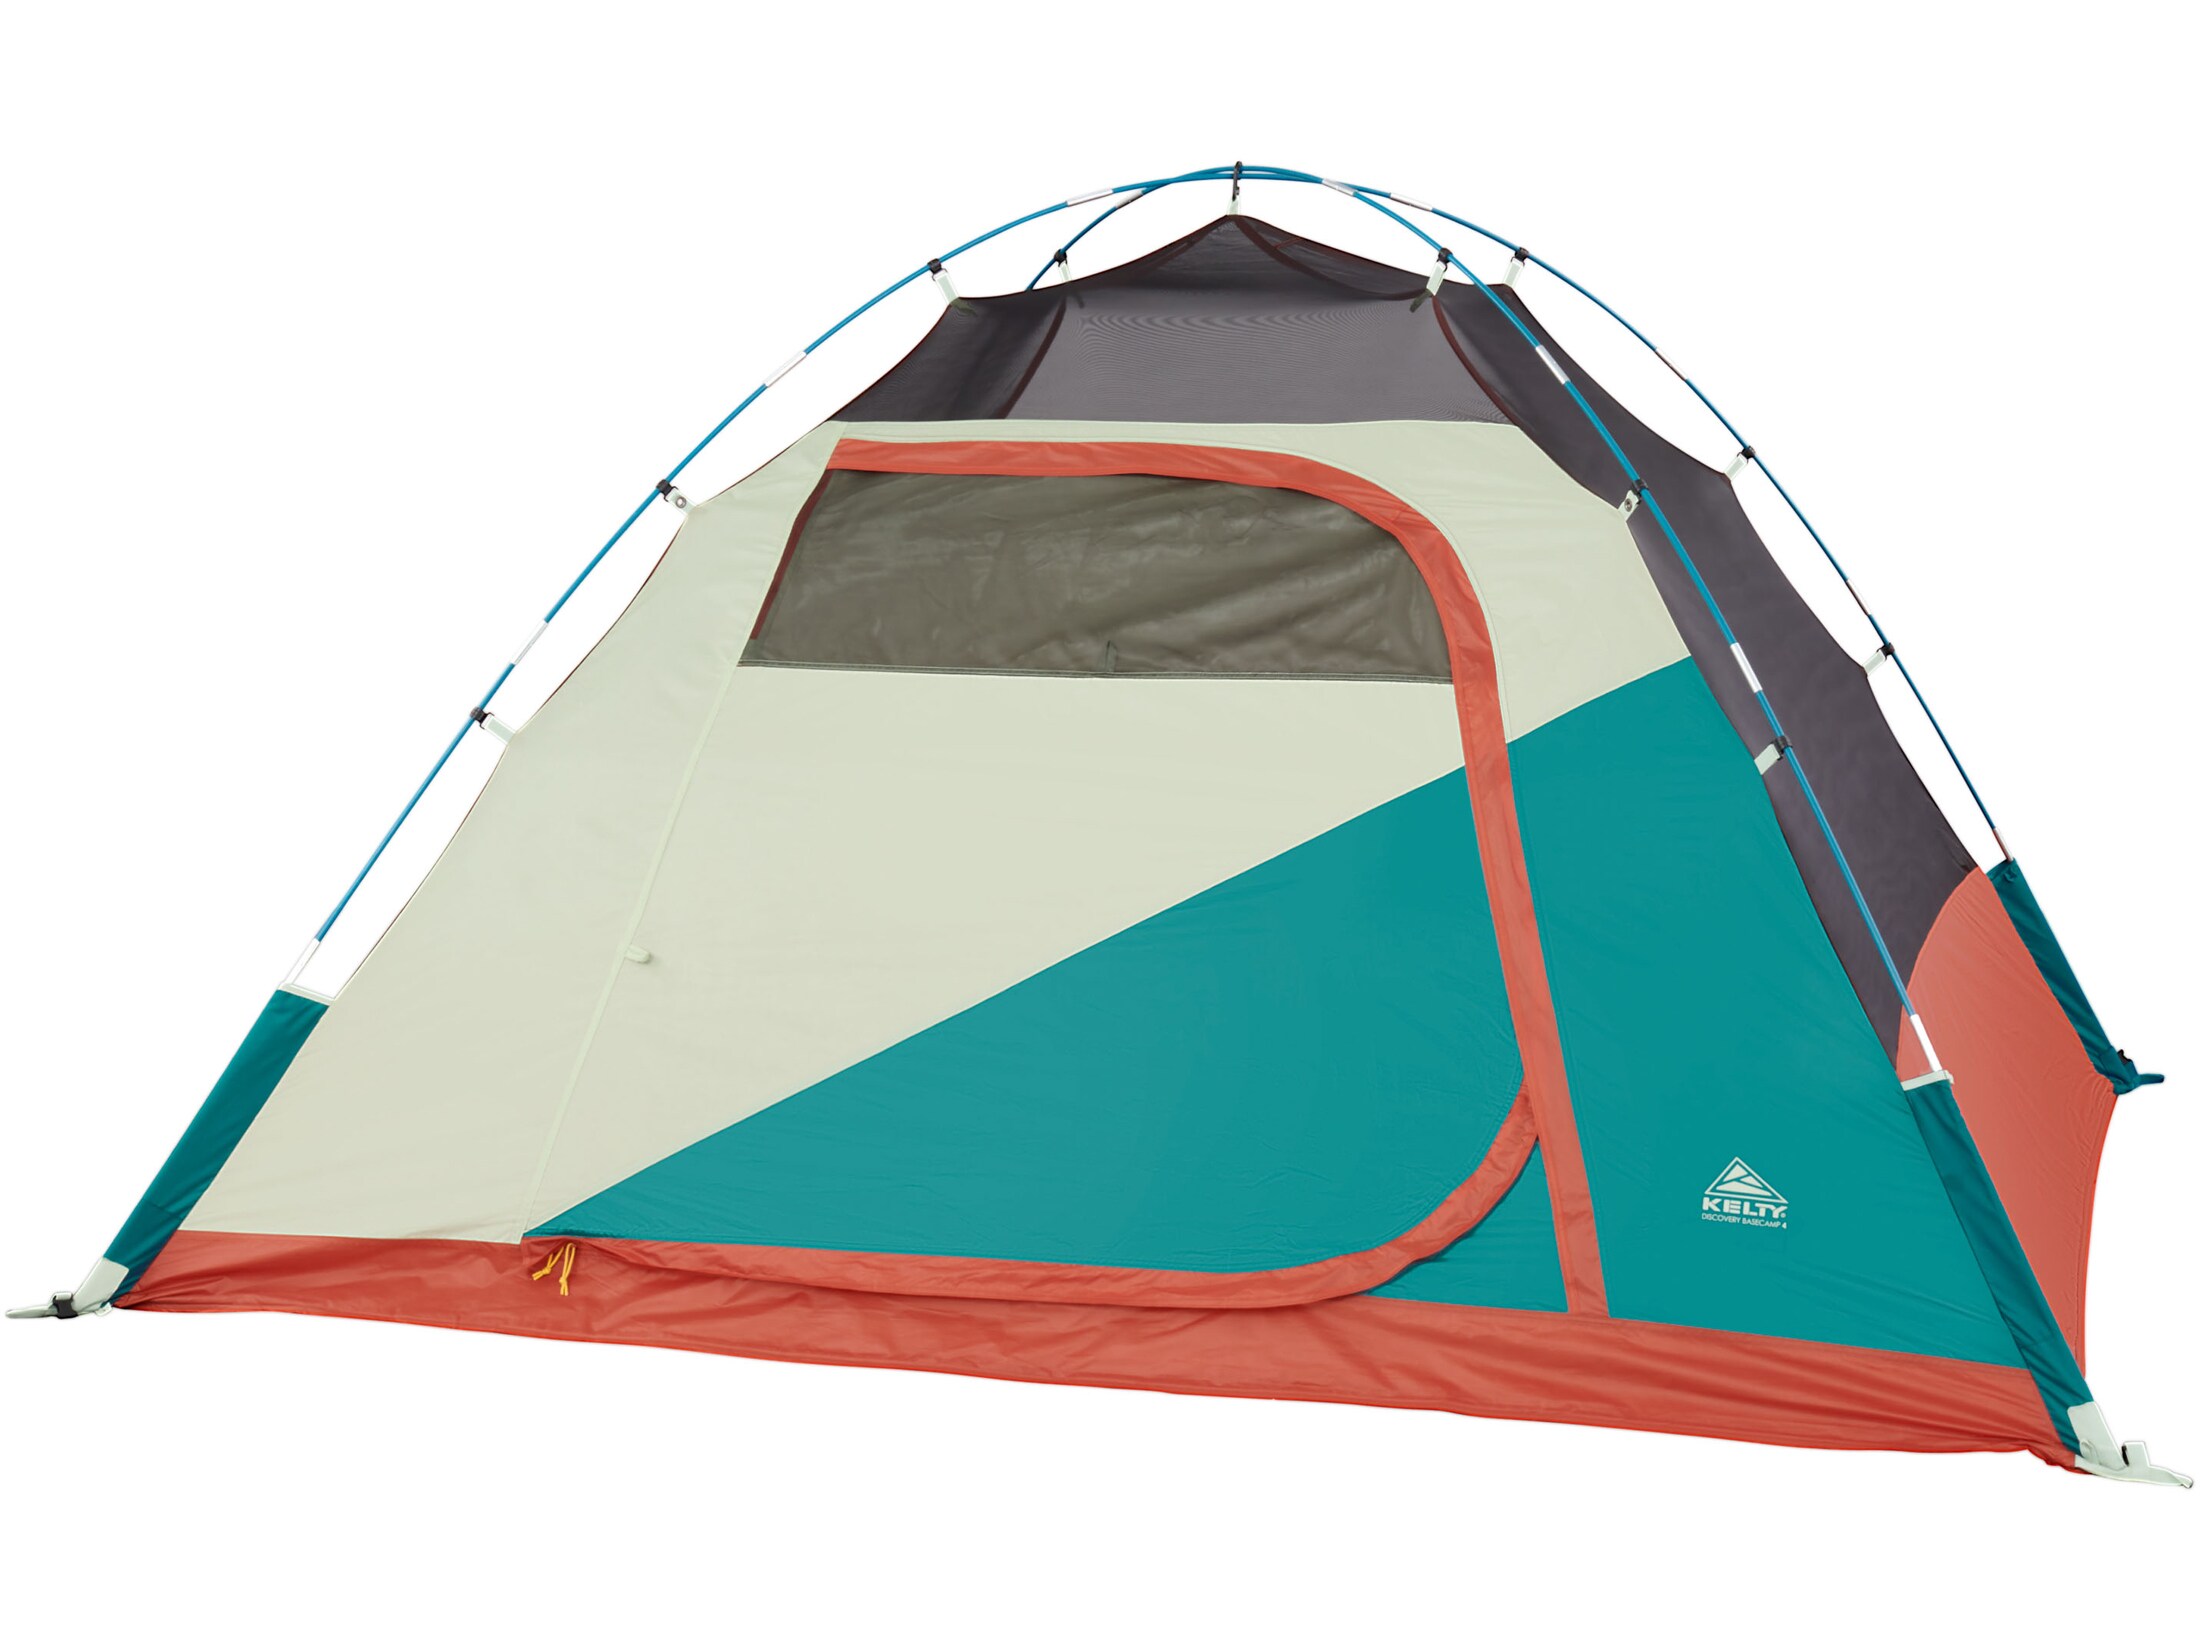 Kelty Discovery Basecamp 4 Person Tent